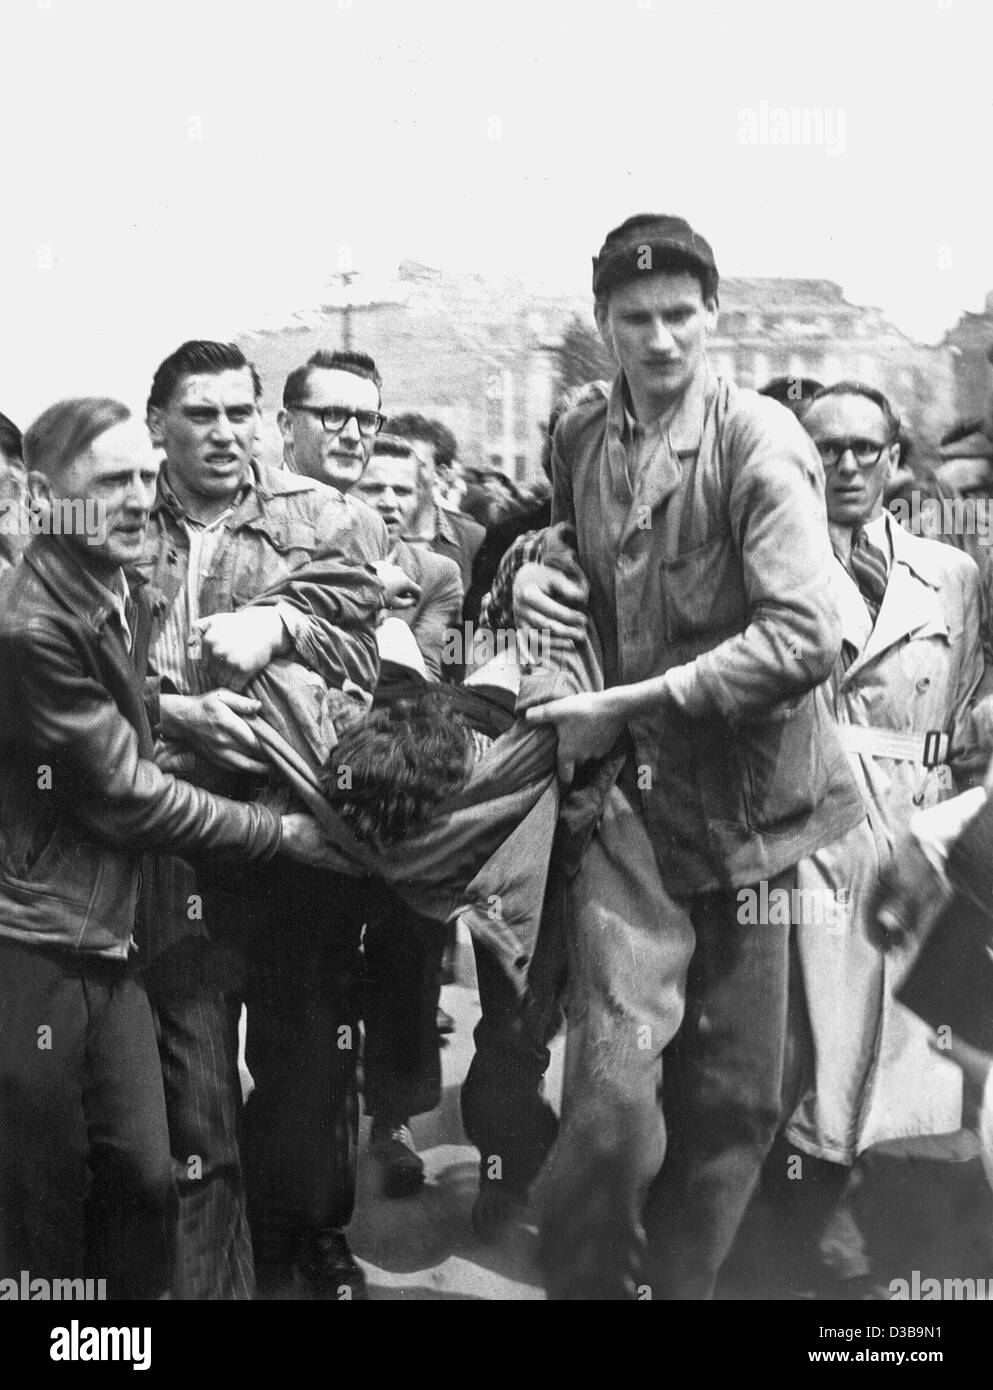 (dpa files) - A demonstrator killed by Soviet tanks is carried away, during the riots against the communist regime in East Berlin, 17 June 1953. The uprising escalated when strikes and a demonstration against unreasonable production quotas were knocked down by Soviet tanks and troops on 17 June. Stock Photo